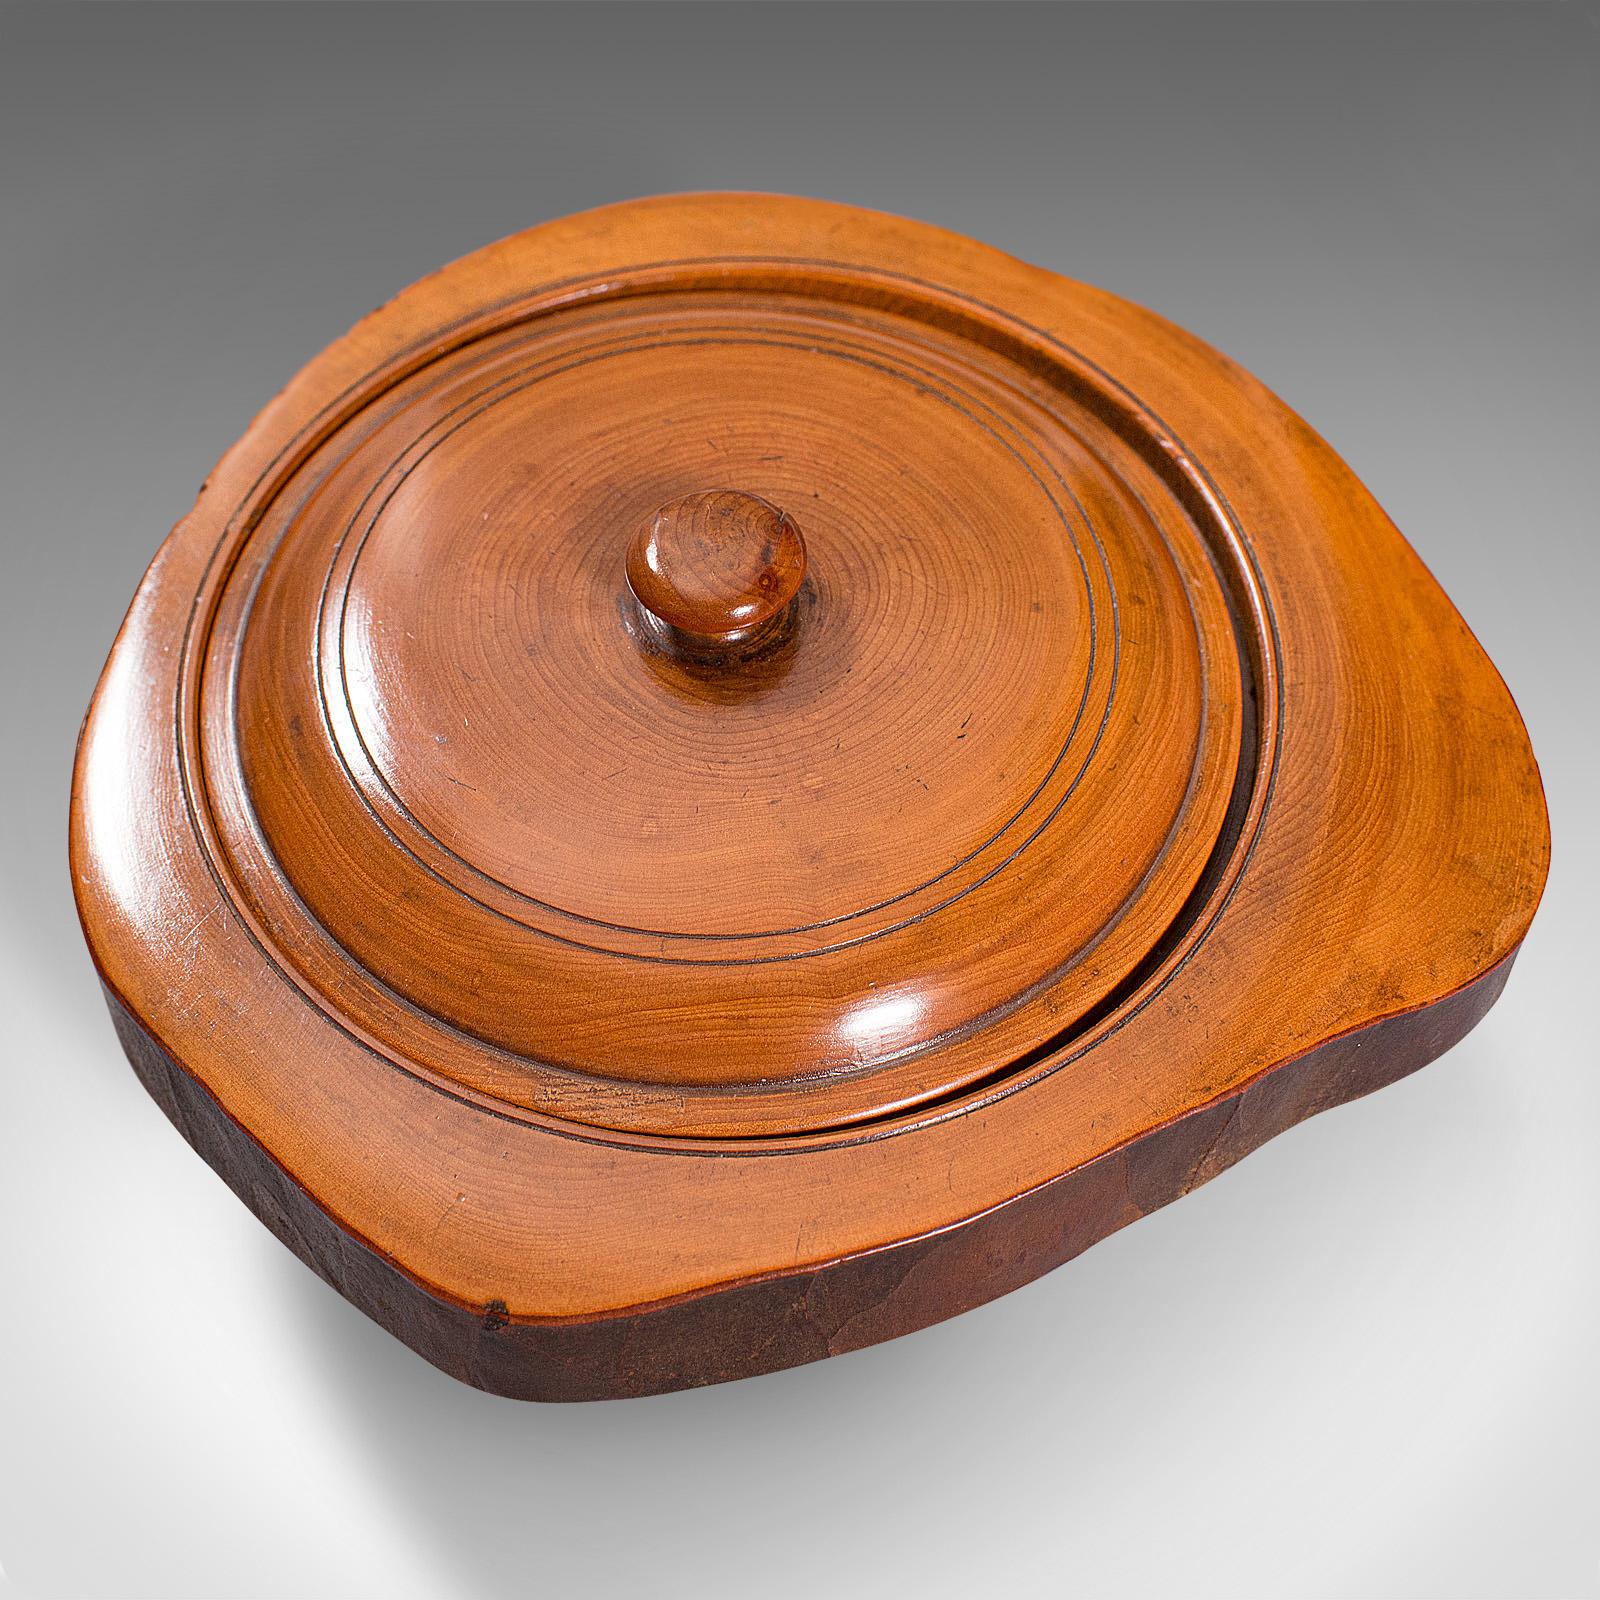 Pair of Antique Carved Lidded Bowls, Treen, English, Yew, Victorian, circa 1900 For Sale 3